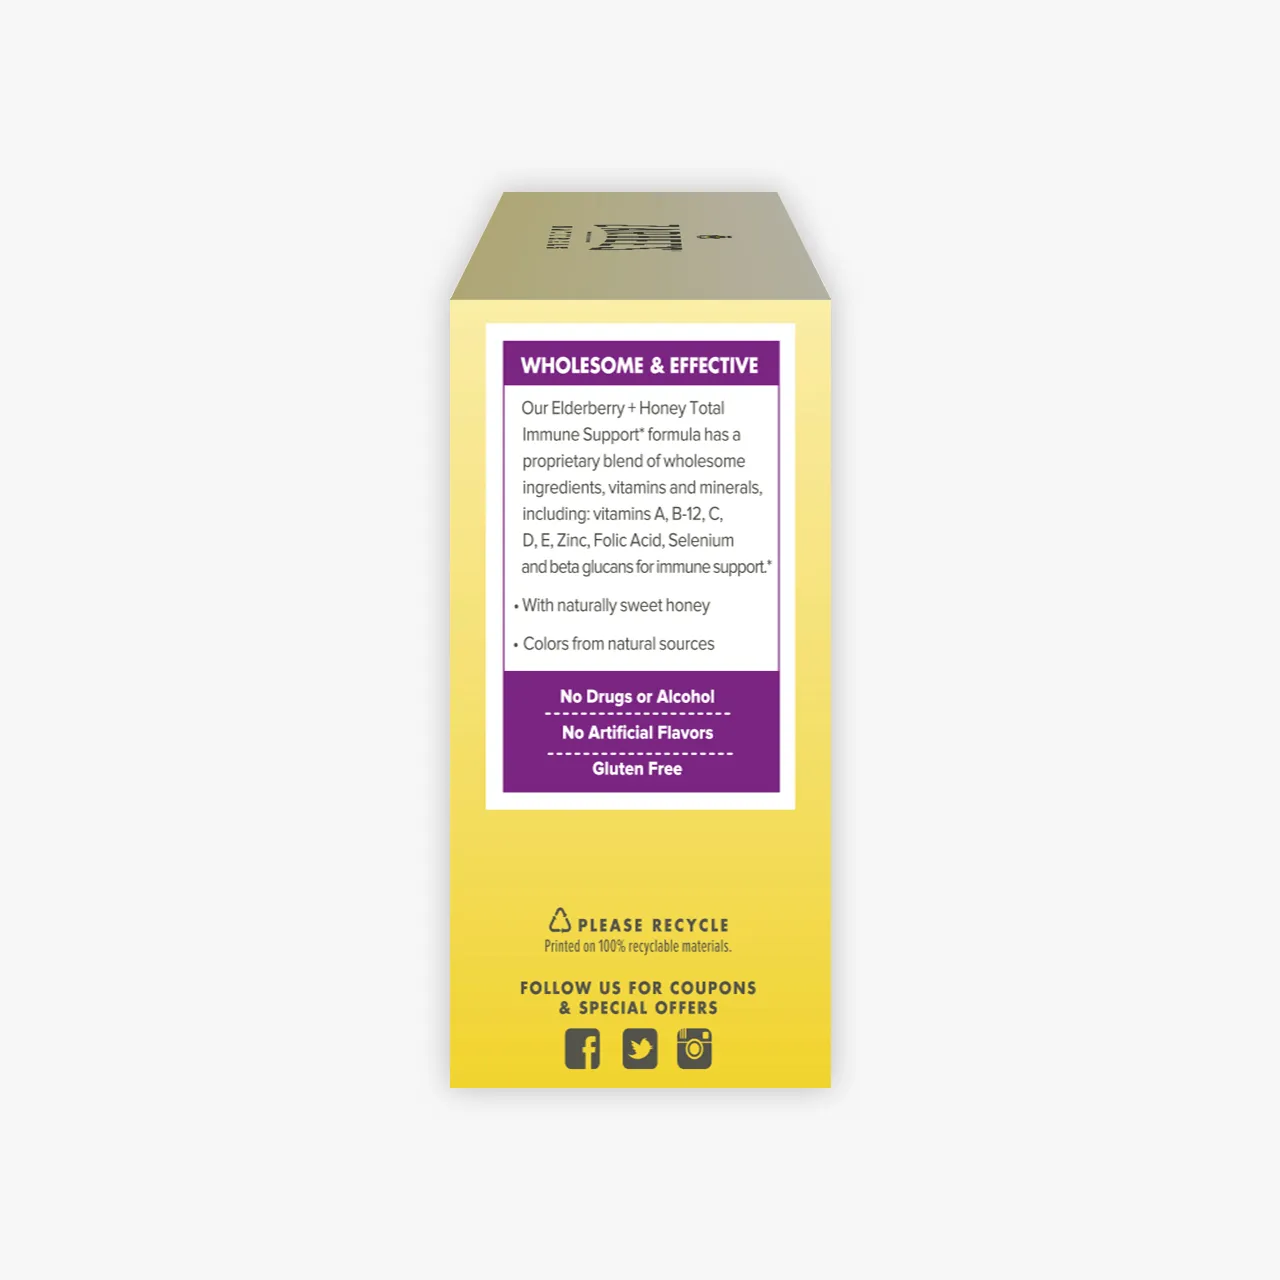 Side of Zarbee’s® Elderberry + Honey Total Immune Support* Chewable packaging shows product is safe & effective, including no drugs, alcohol, or gluten